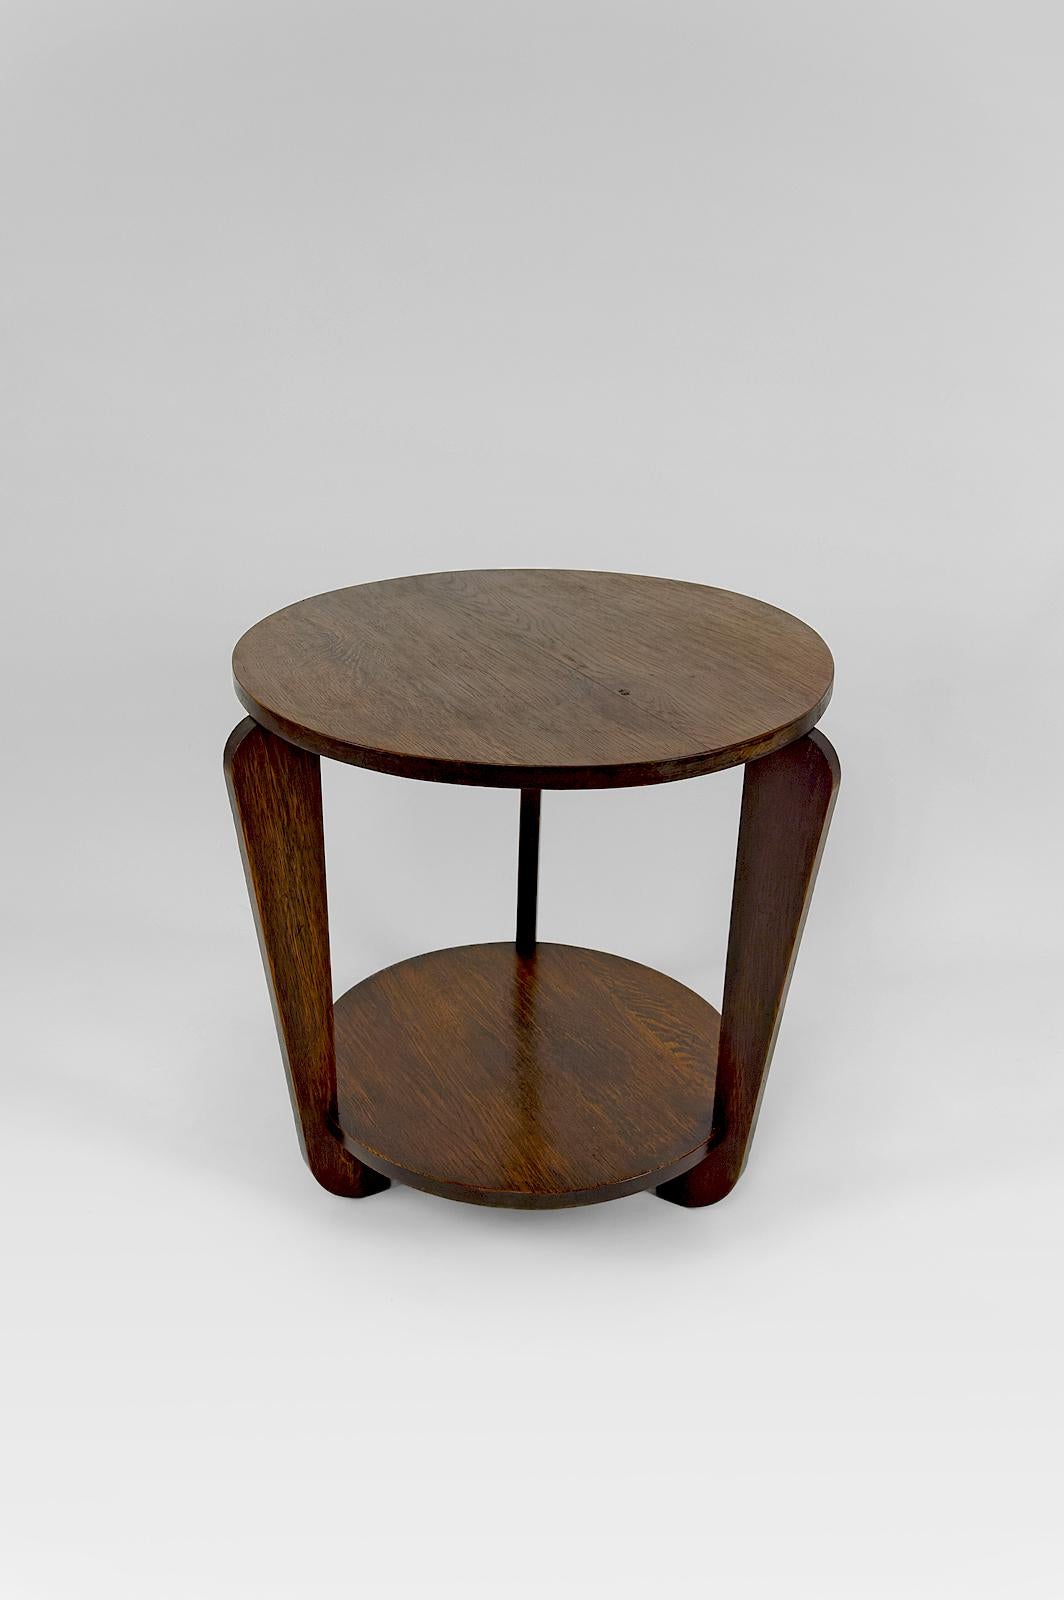 Modernist Art Deco round pedestal table in patinated oak, France, Circa 1930 For Sale 3